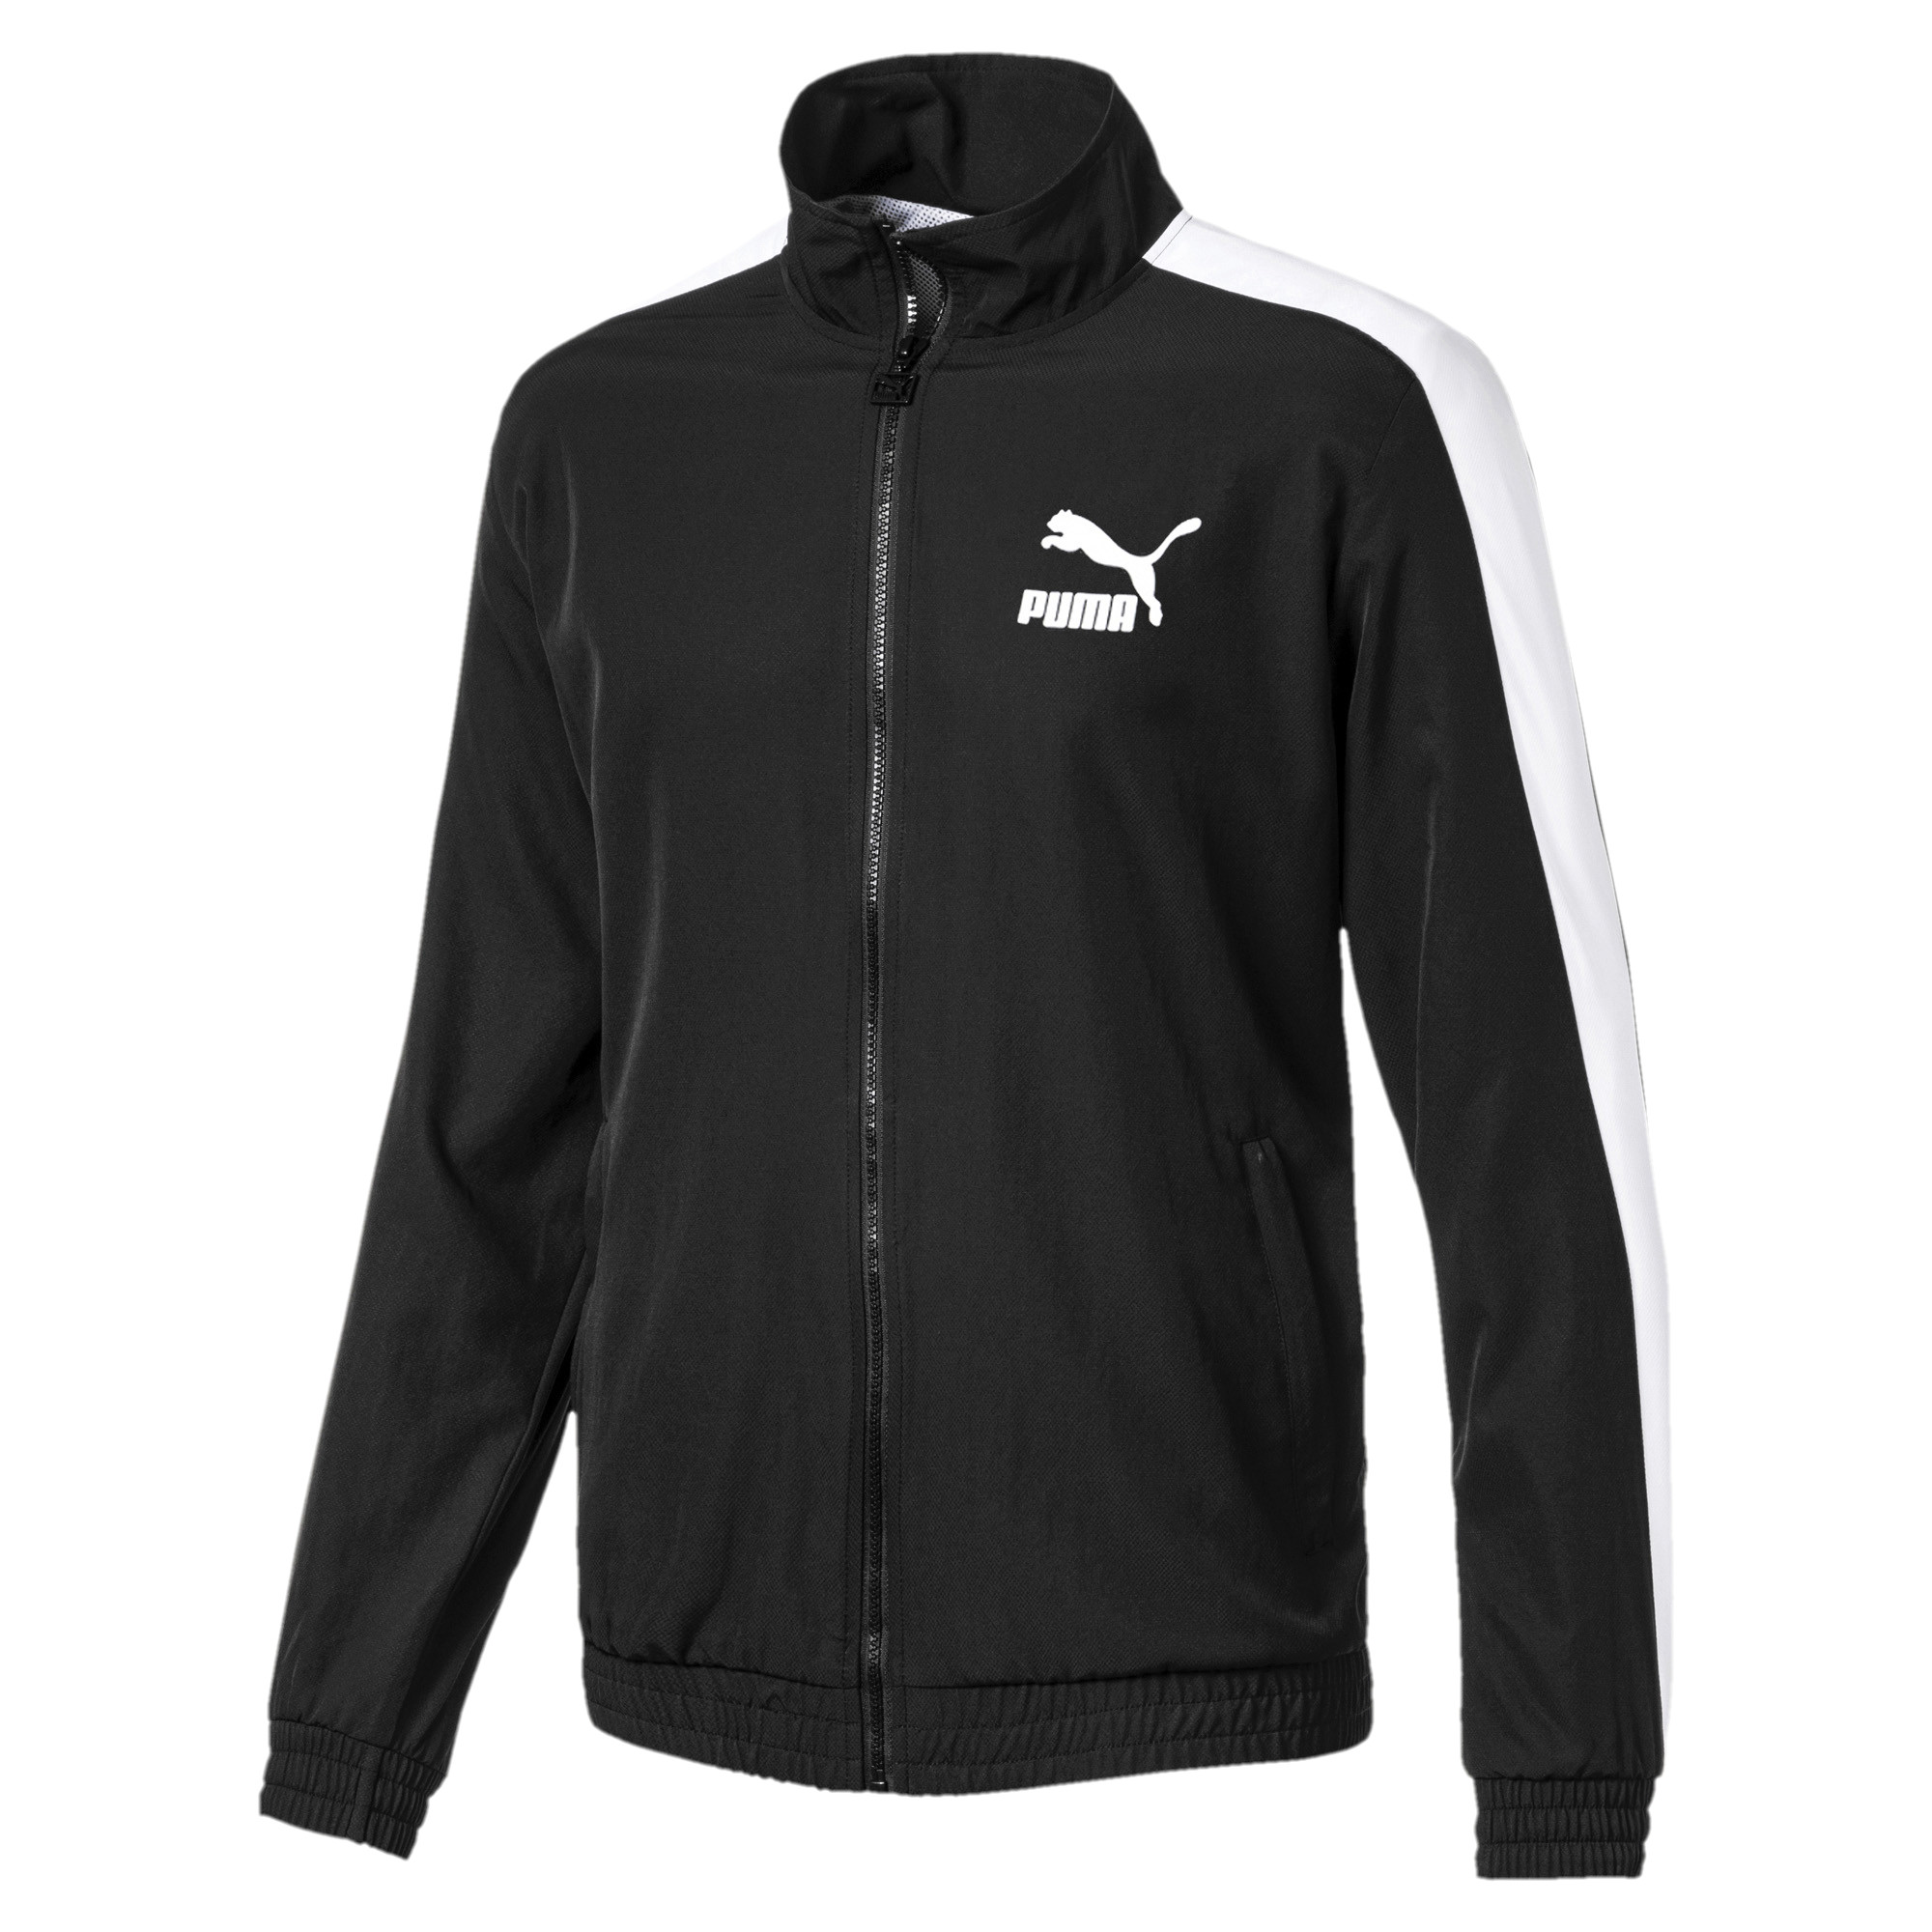 Puma Friend's and Family Sale - 25%-40% Off with FREE Shipping from ...